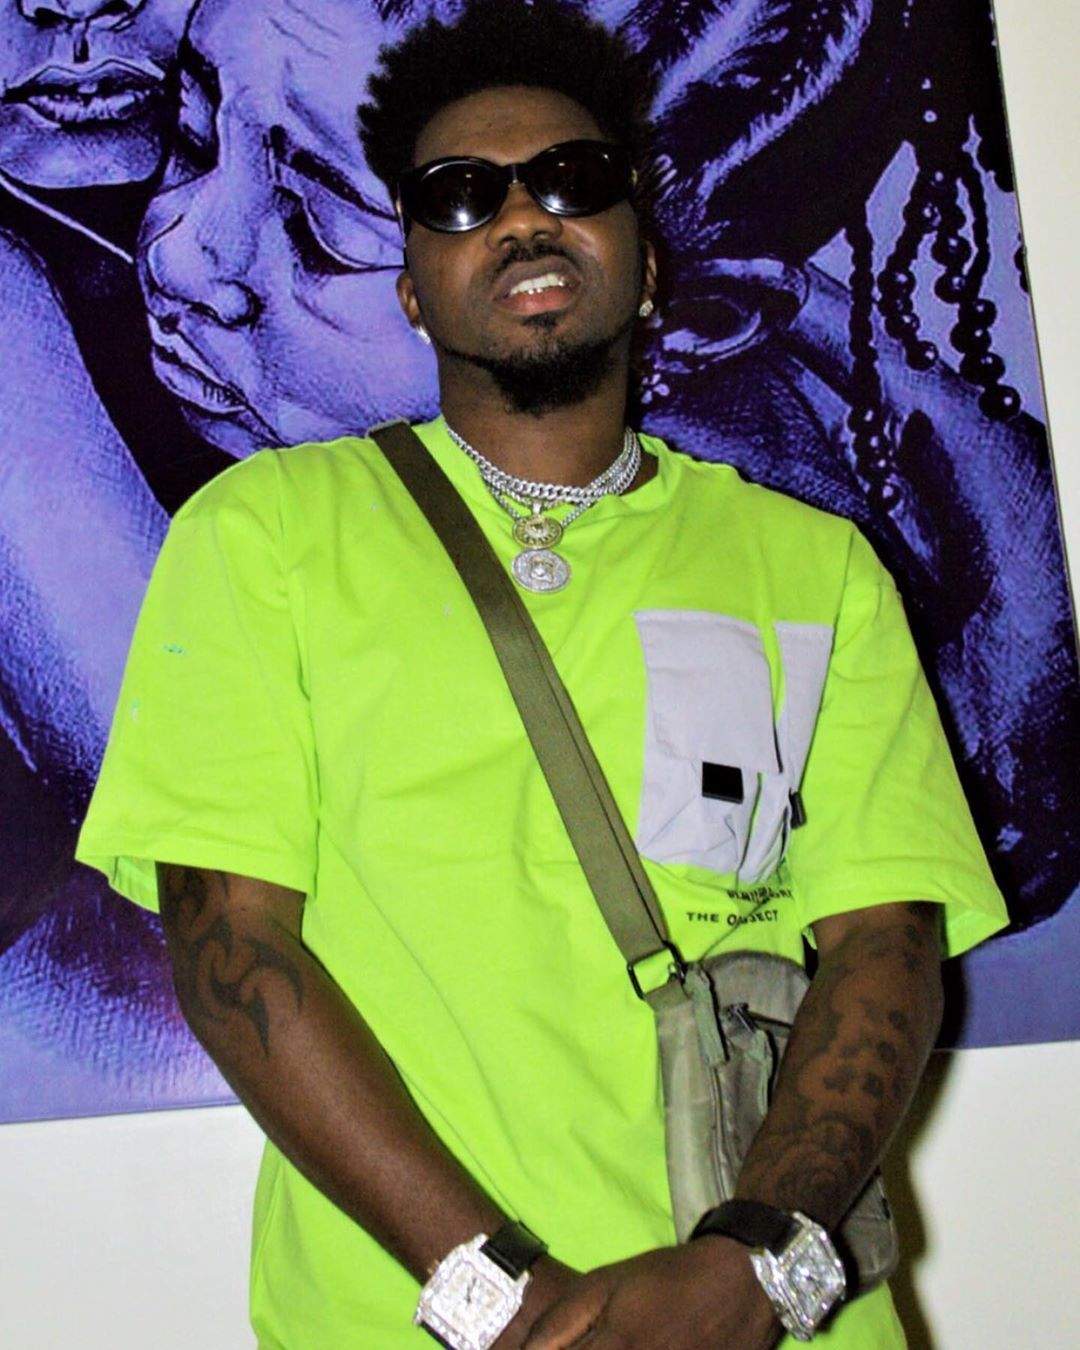 Skiibii Receives Loads Of Credit Alerts From His Instagram Followers & Fans On His Birthday